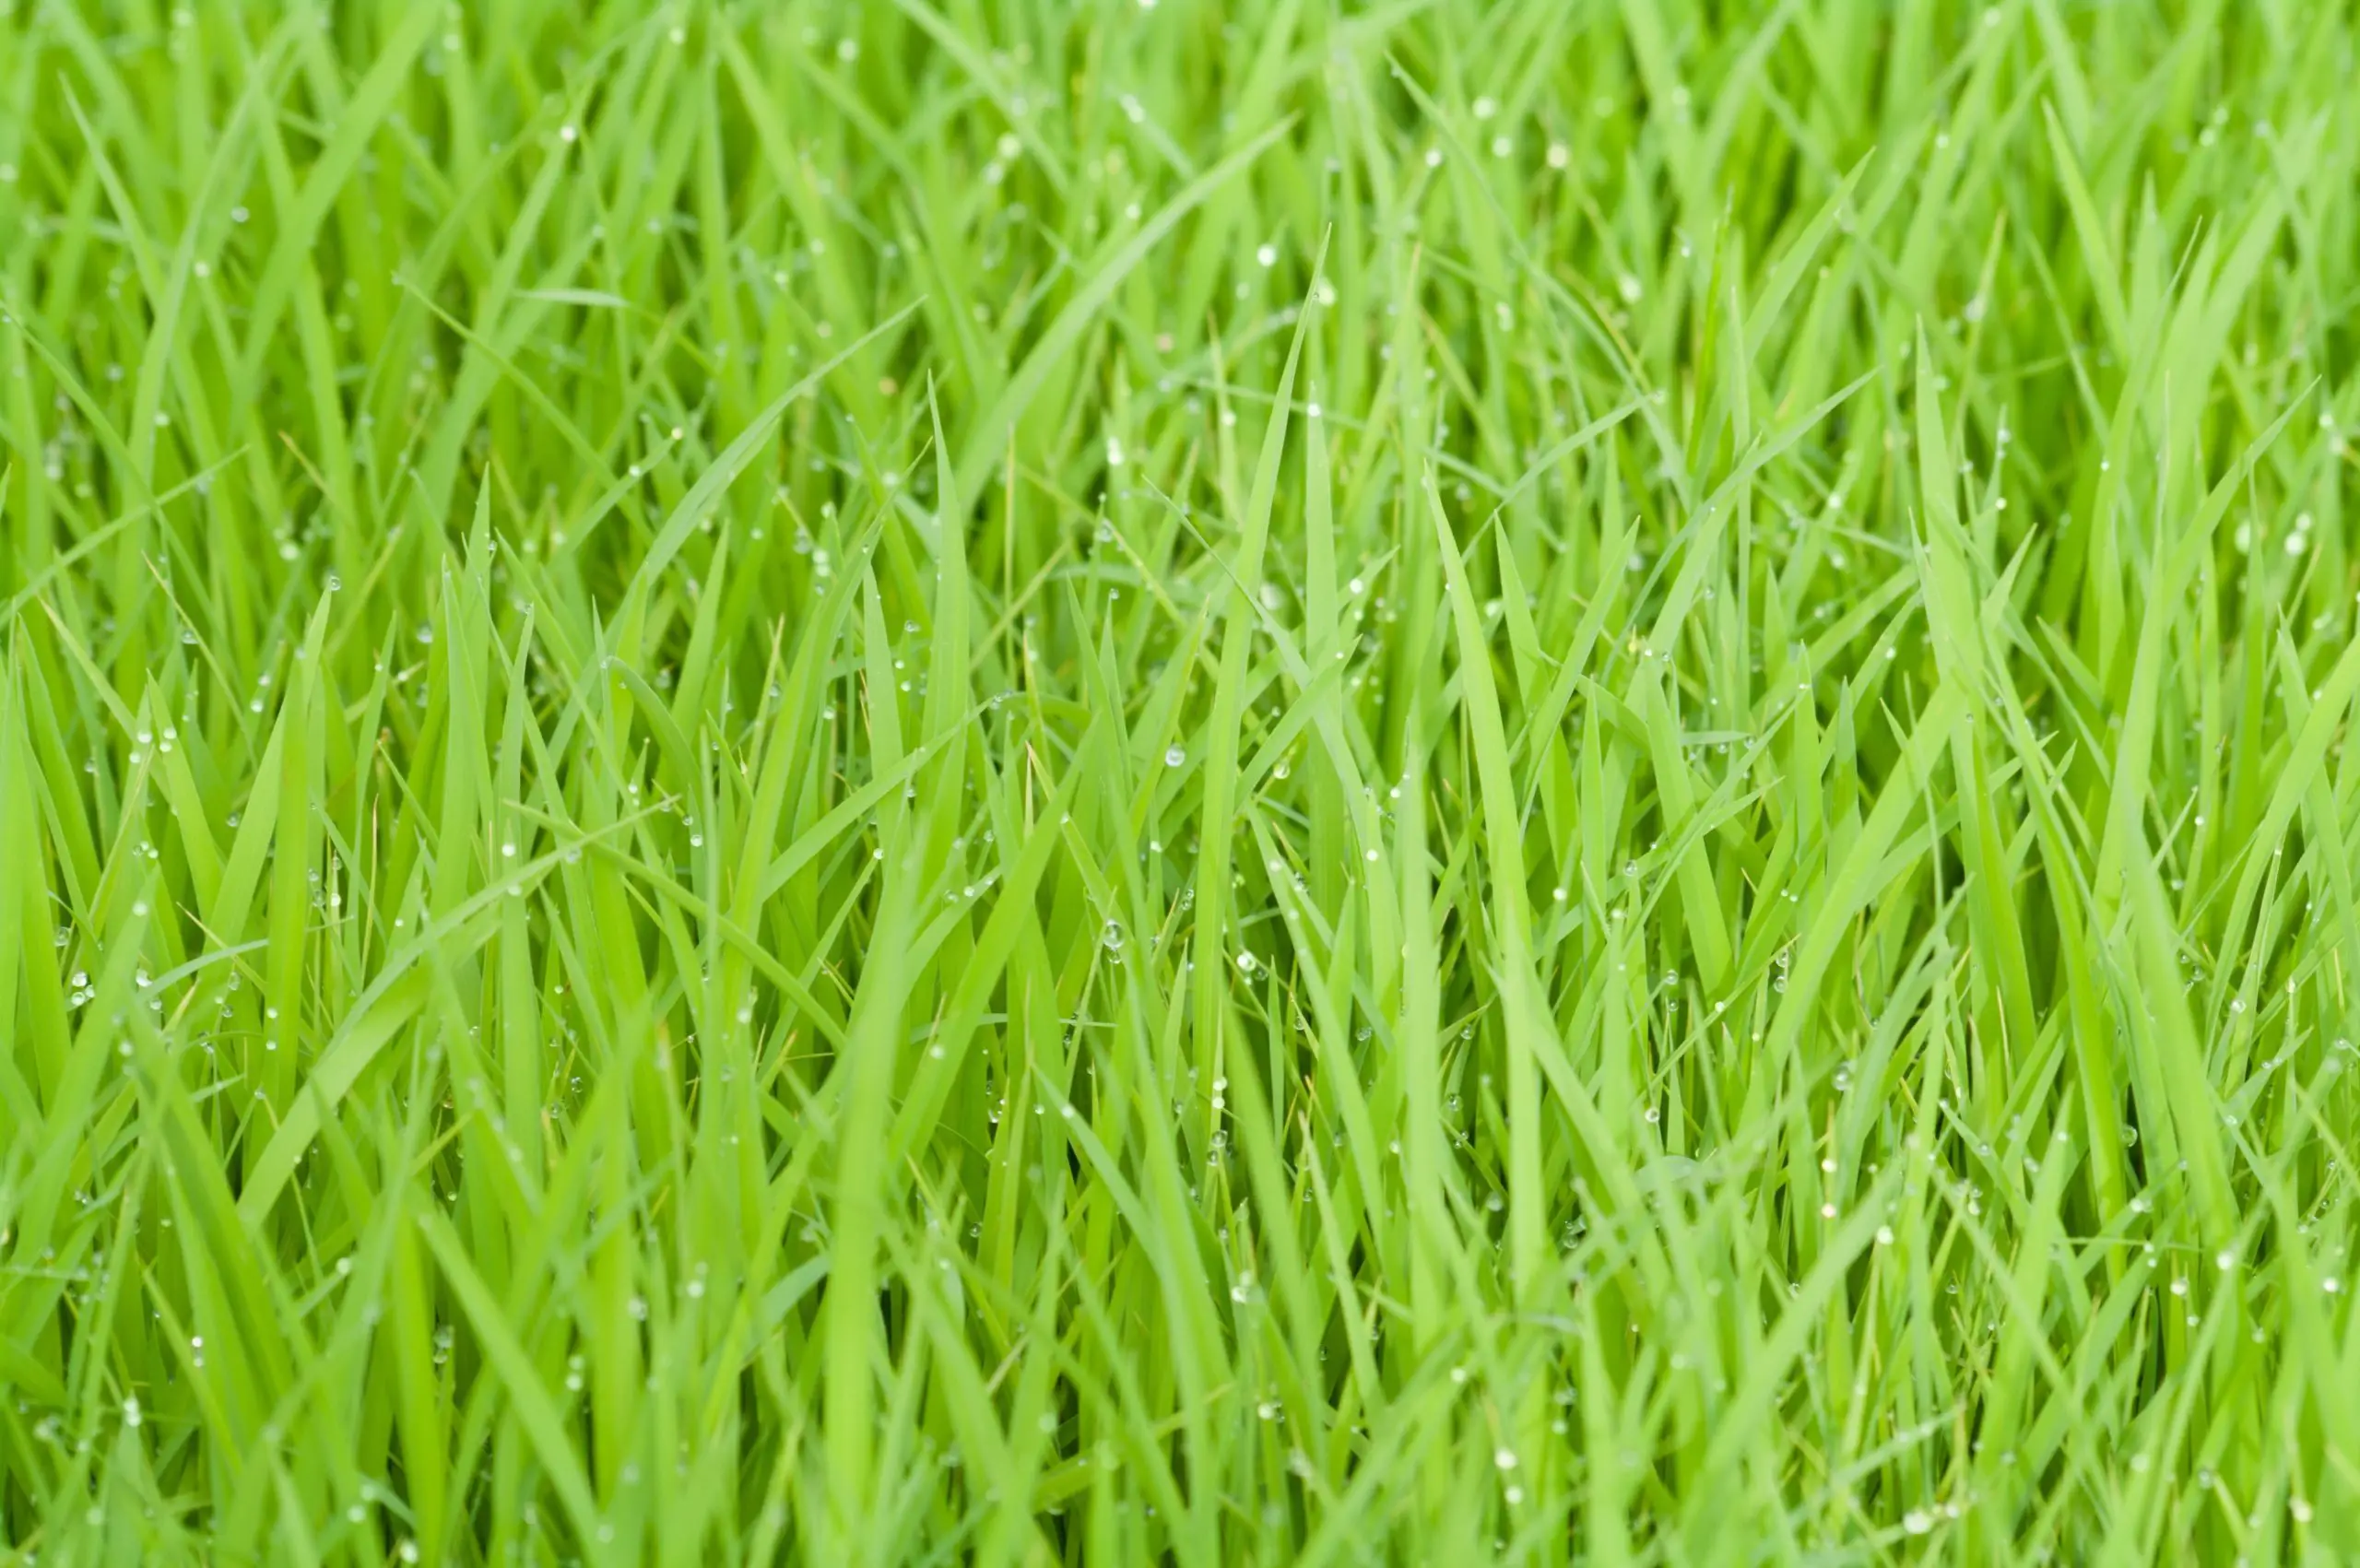 Wet Lawn - Grass Stickers and Grass Burrs - How to Get Rid of Them - Patricia